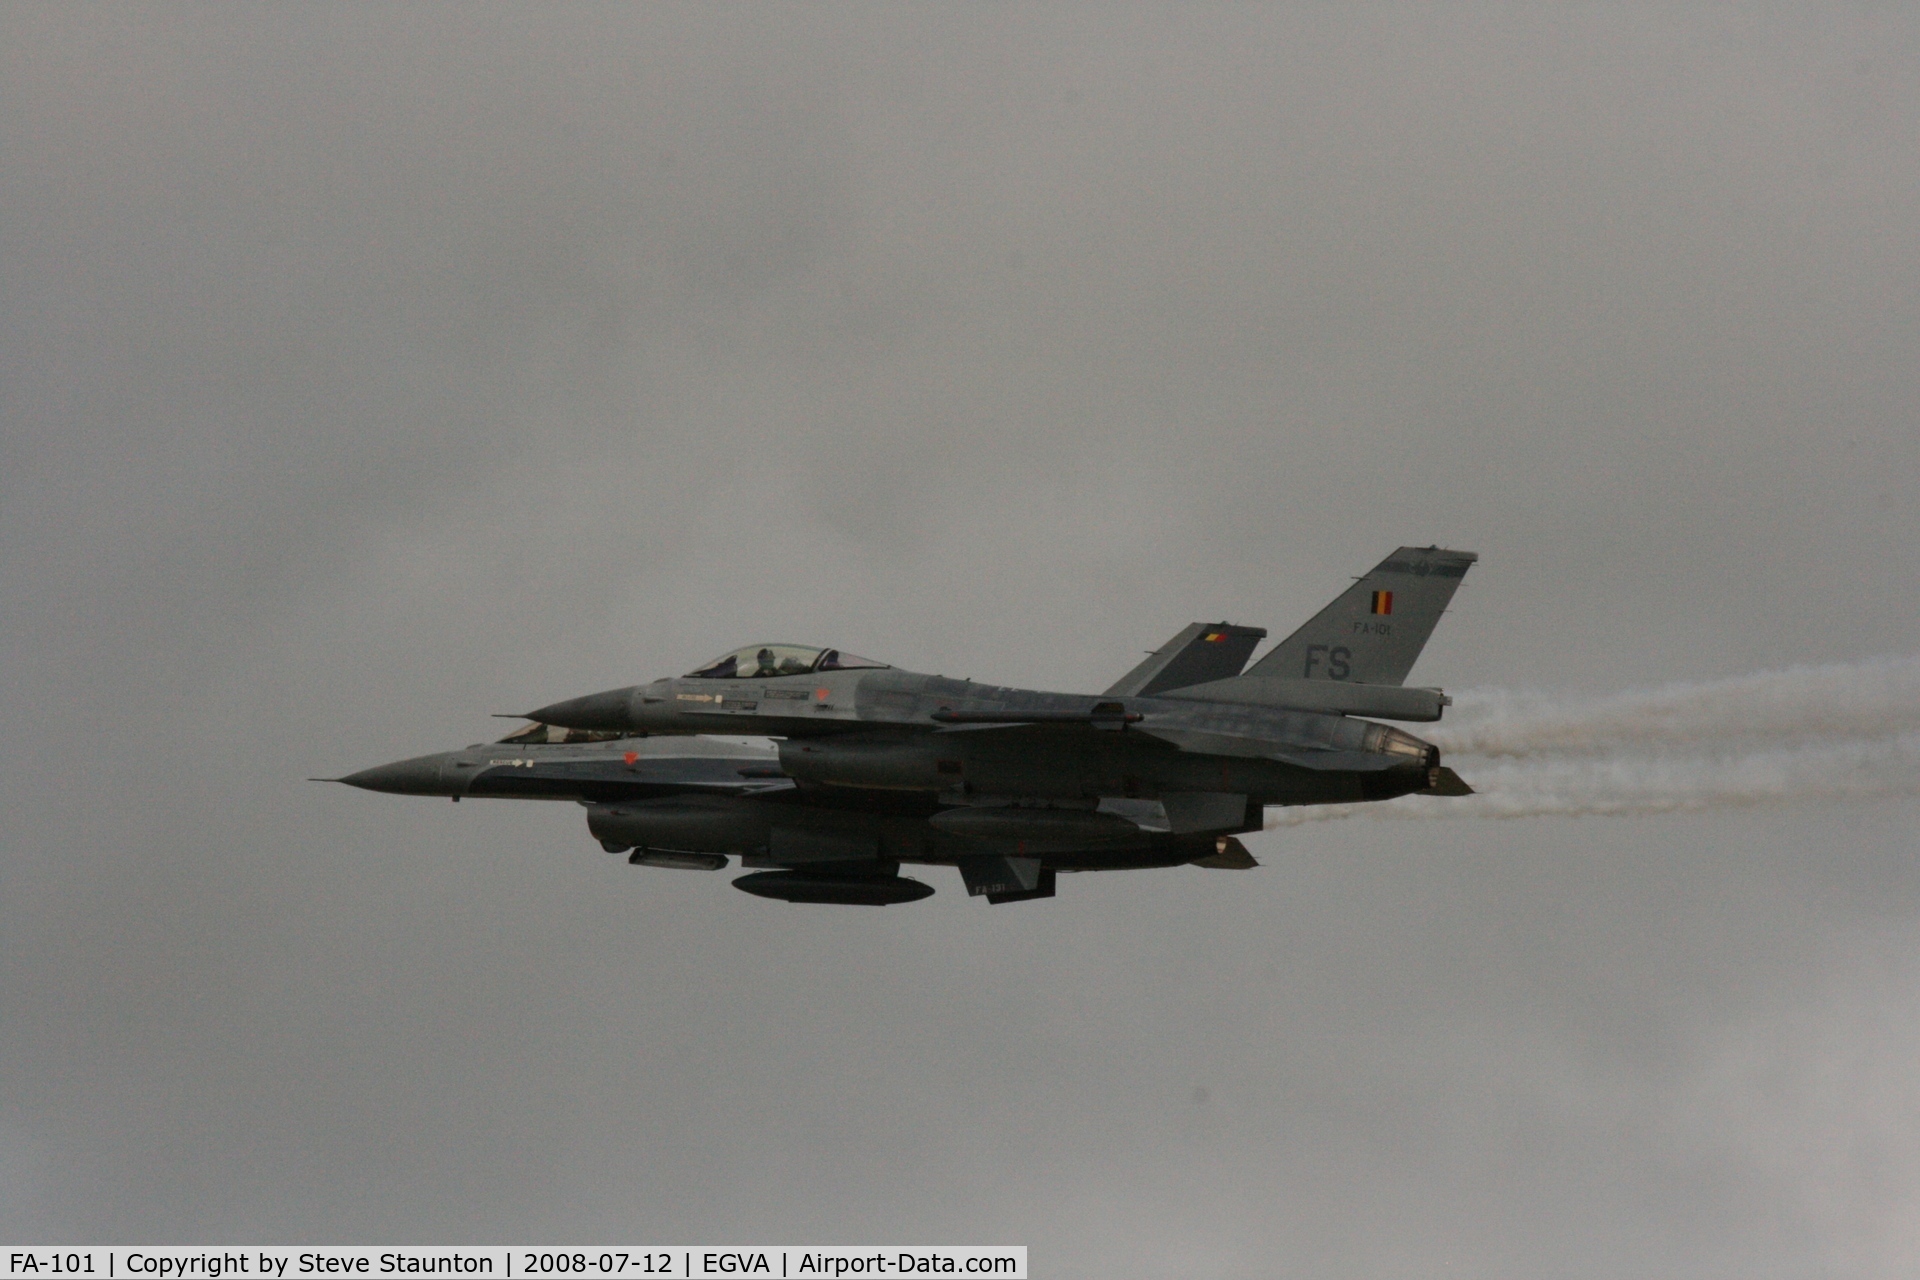 FA-101, SABCA F-16AM Fighting Falcon C/N 6H-101, Taken at the Royal International Air Tattoo 2008 during arrivals and departures (show days cancelled due to bad weather)